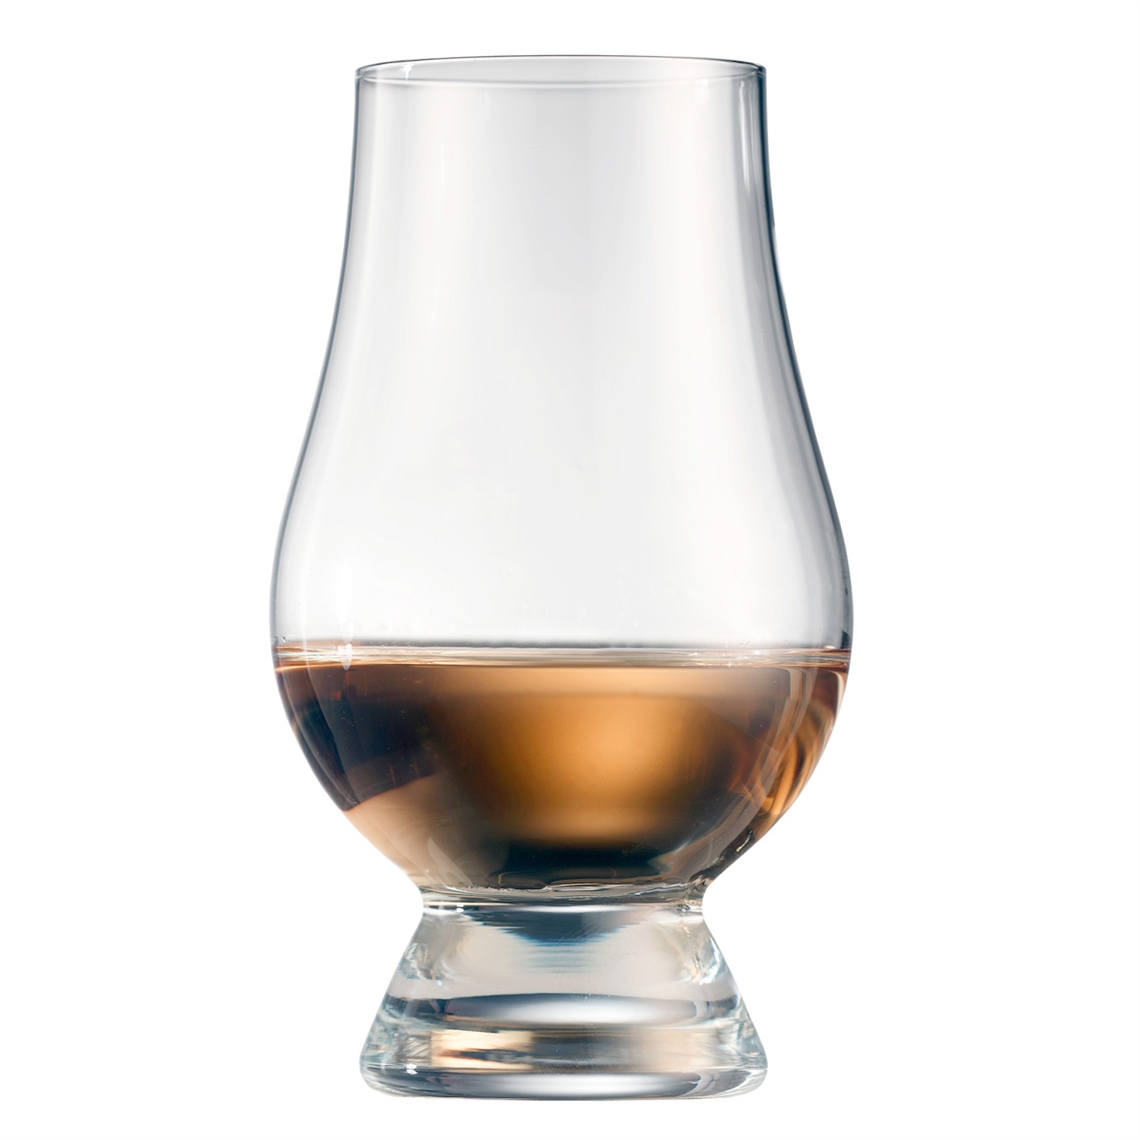 View more cocktail glasses from our Whisky Glasses range